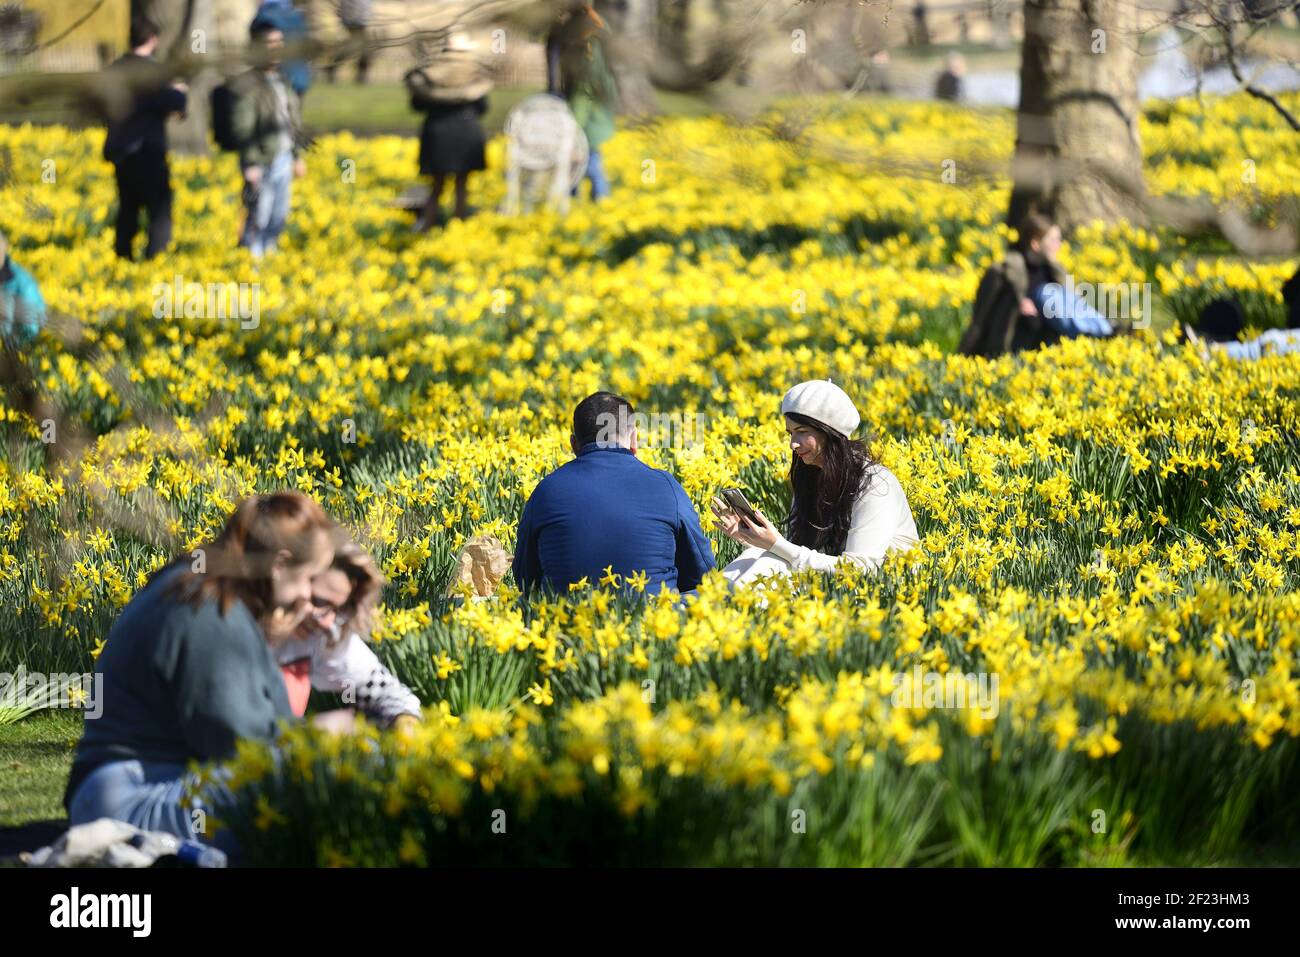 London, England, UK. St James's Park - people among the daffodils enjoying the sun in March 2021 Stock Photo